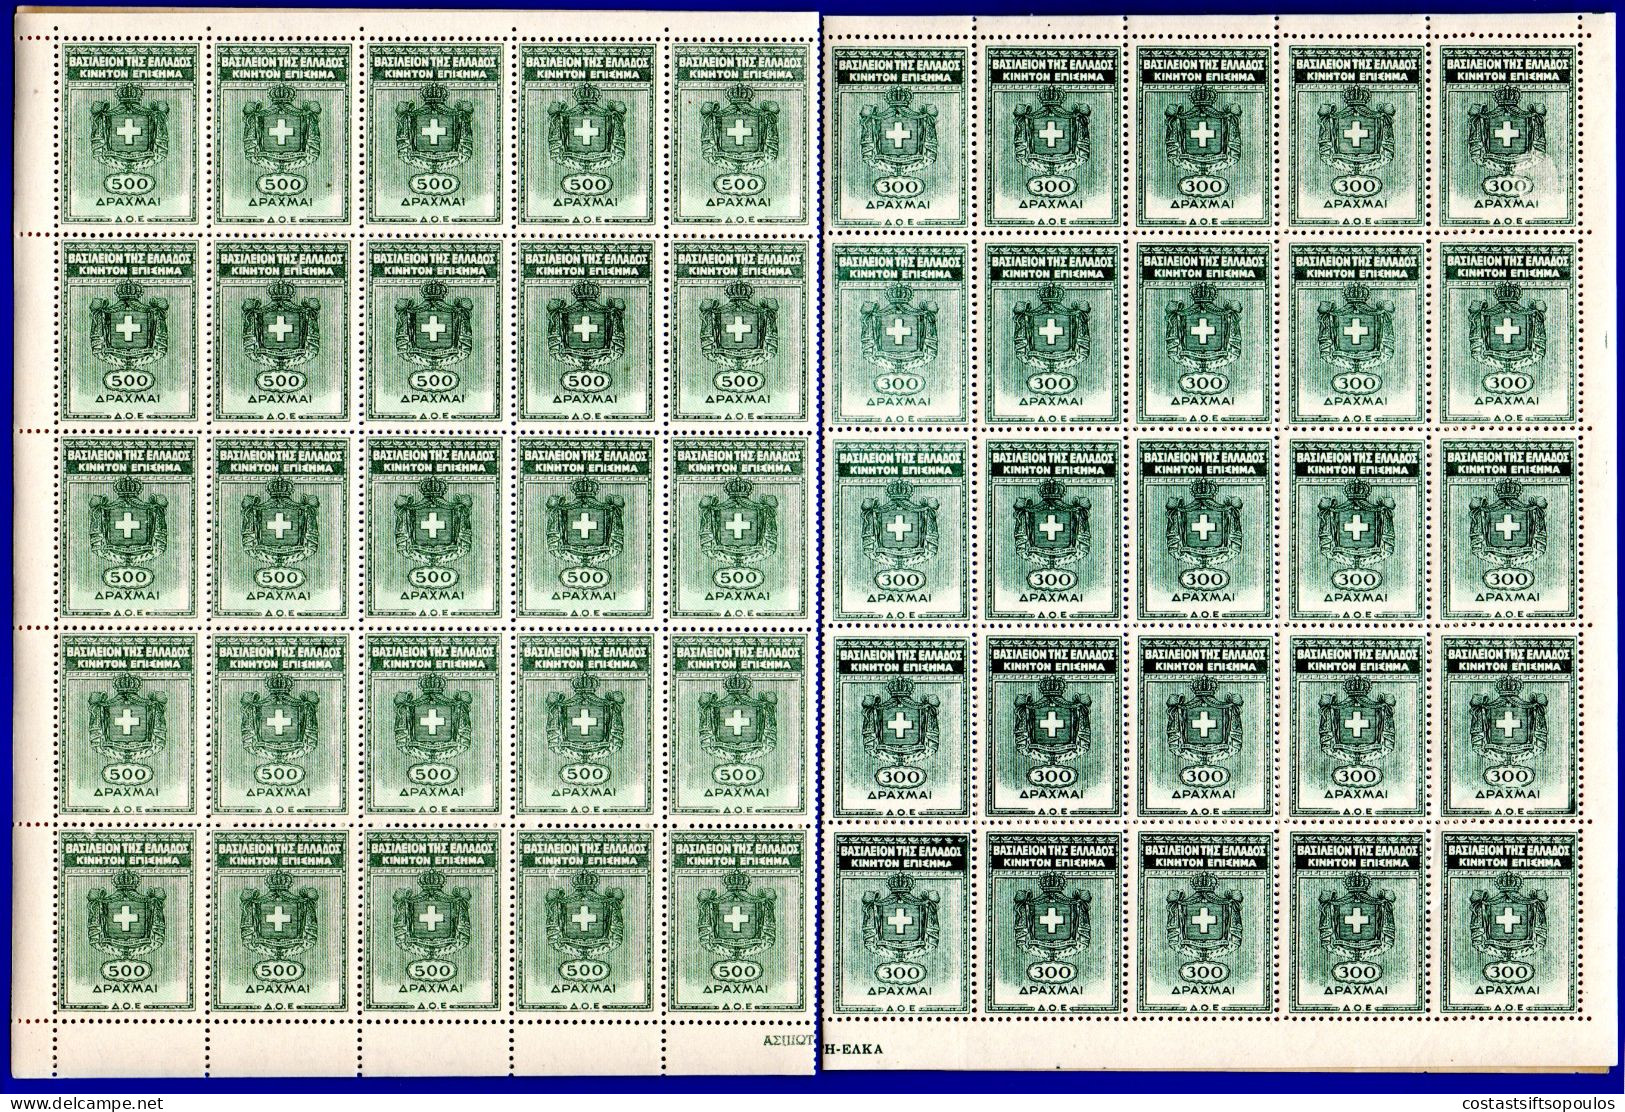 2507. GREECE. REVENUES, 6 MNH SHEETS OF 50 FOLDED IN THE MIDDLE,FEW PERF.SPLIT IN MARGINS,2 STAMPS LIGHT FAULTS. - Fiscaux